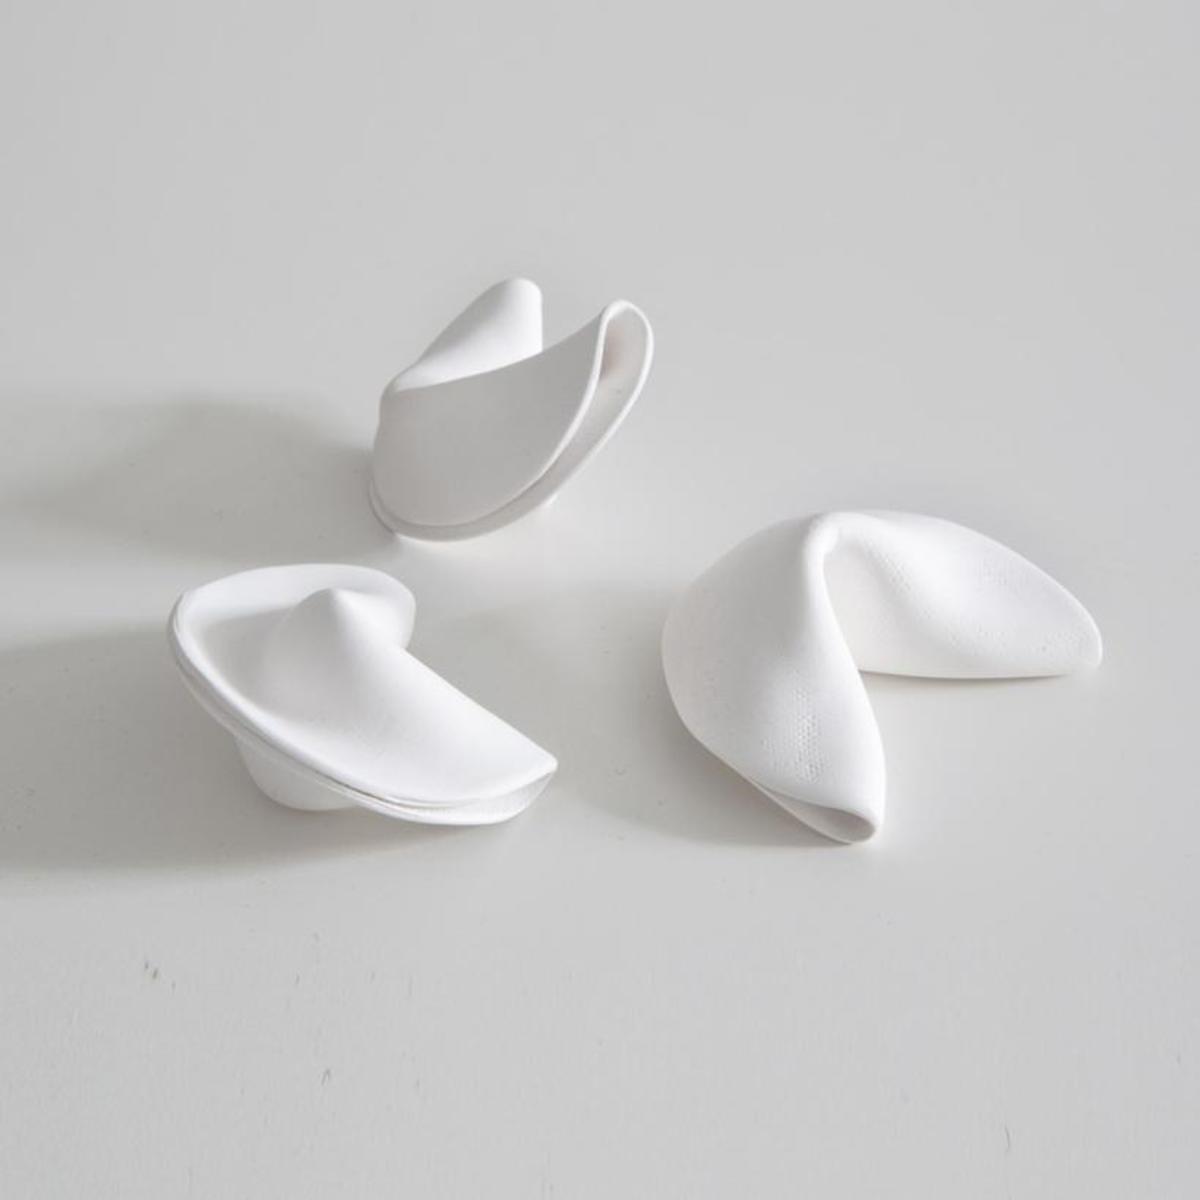 I couldn't find a tutorial for this, but you can purchase porcelain fortune cookies.